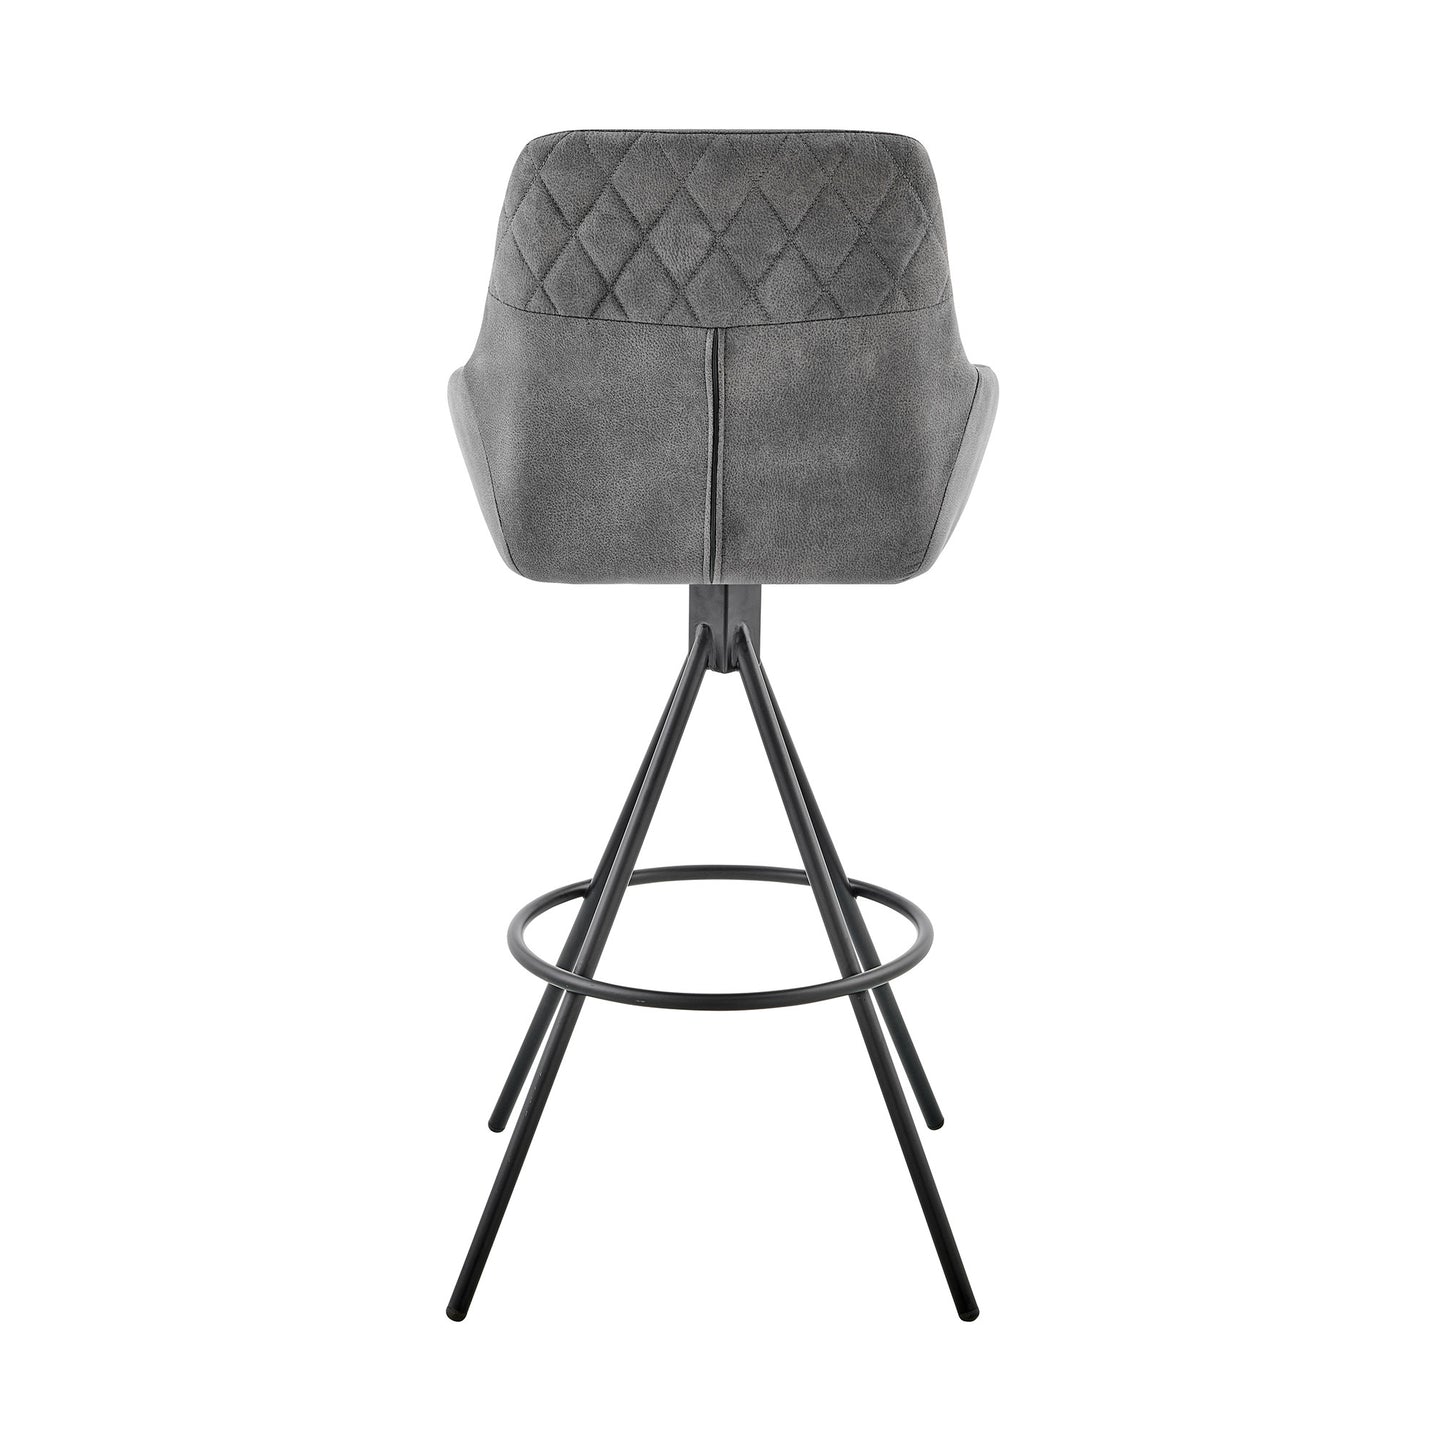 41" Charcoal Microfiber and Black Iron Bar Height Chair By Homeroots